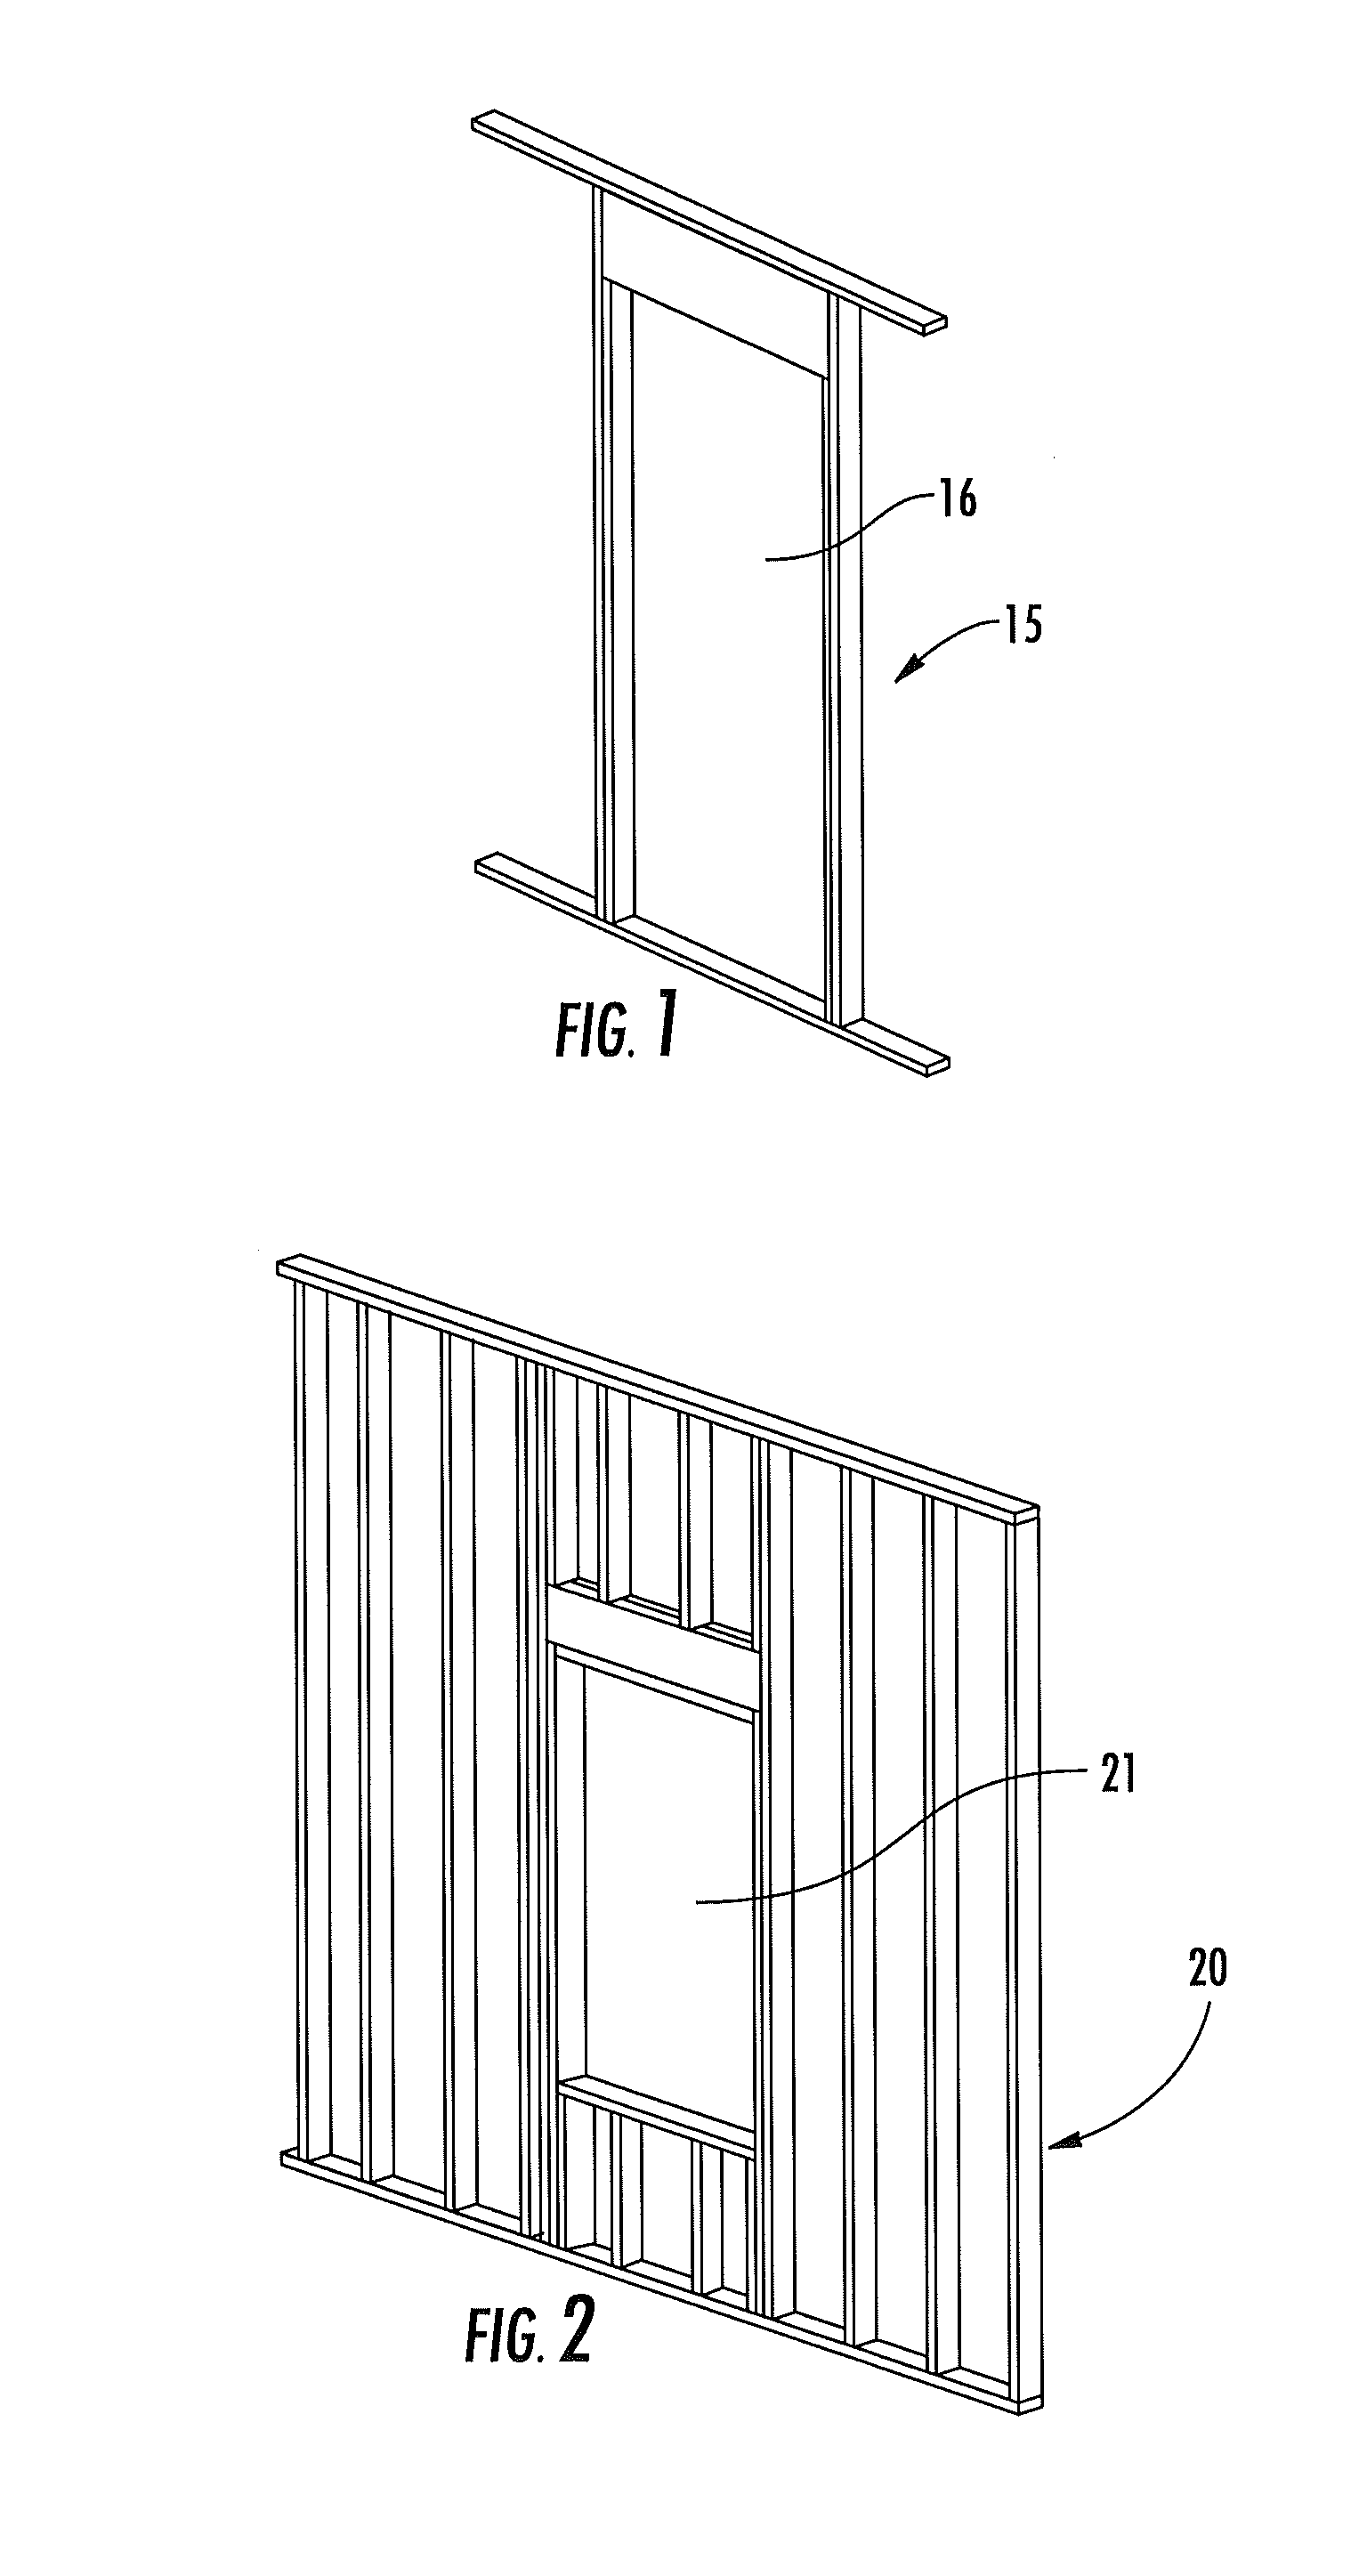 Automated apparatus for constructing assemblies of building components